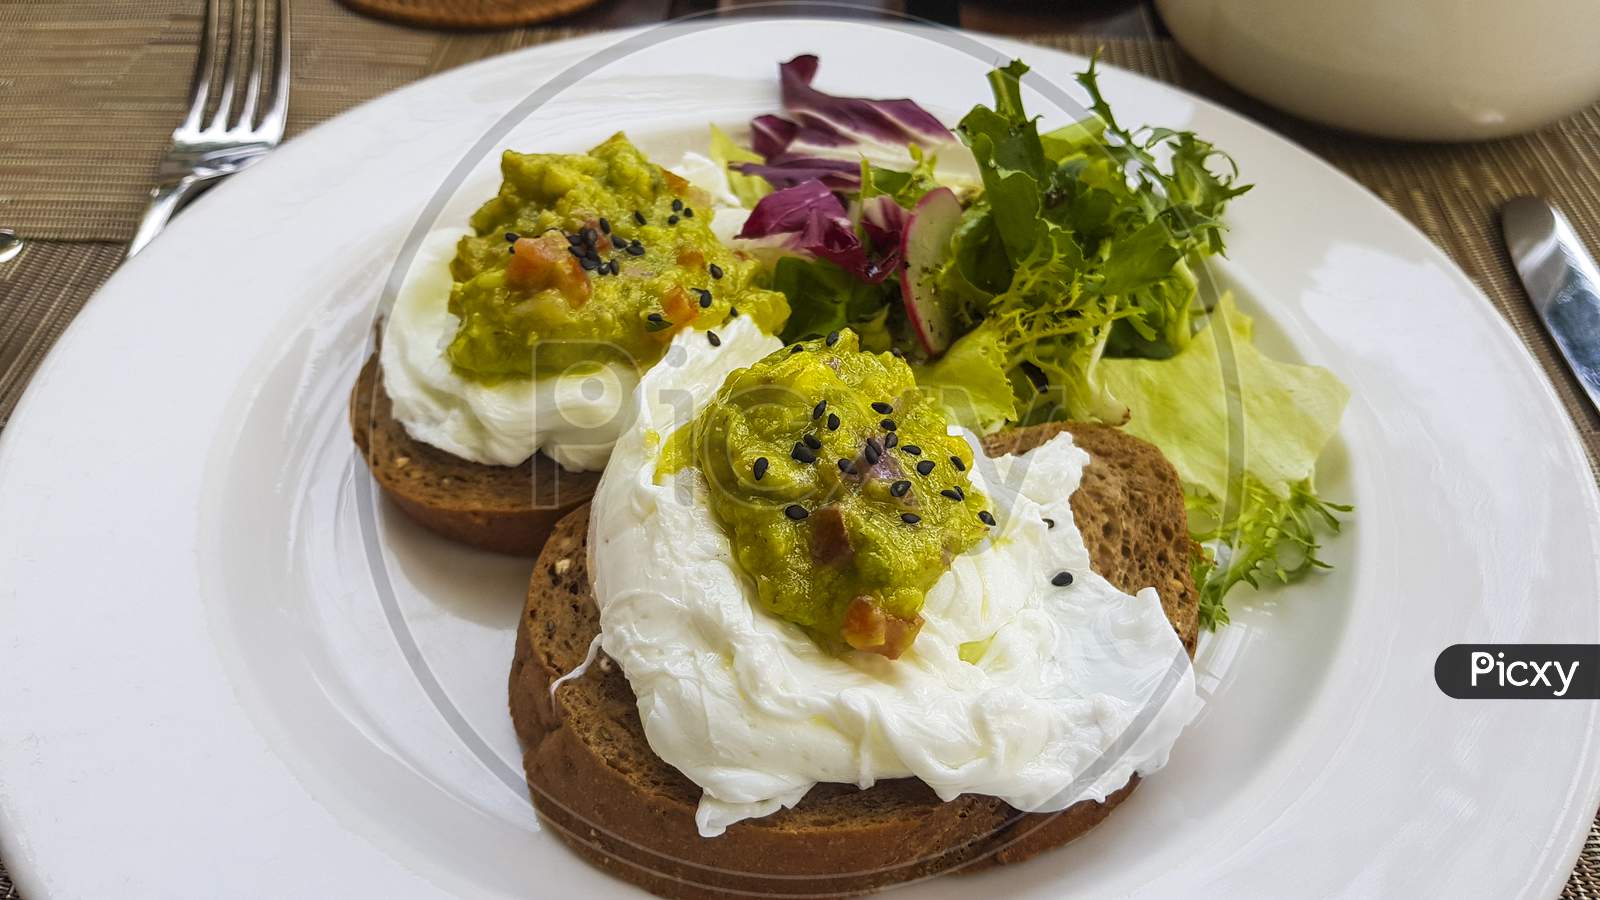 Two Slices Of Dark Bread With Poached Eggs On A White Plate.